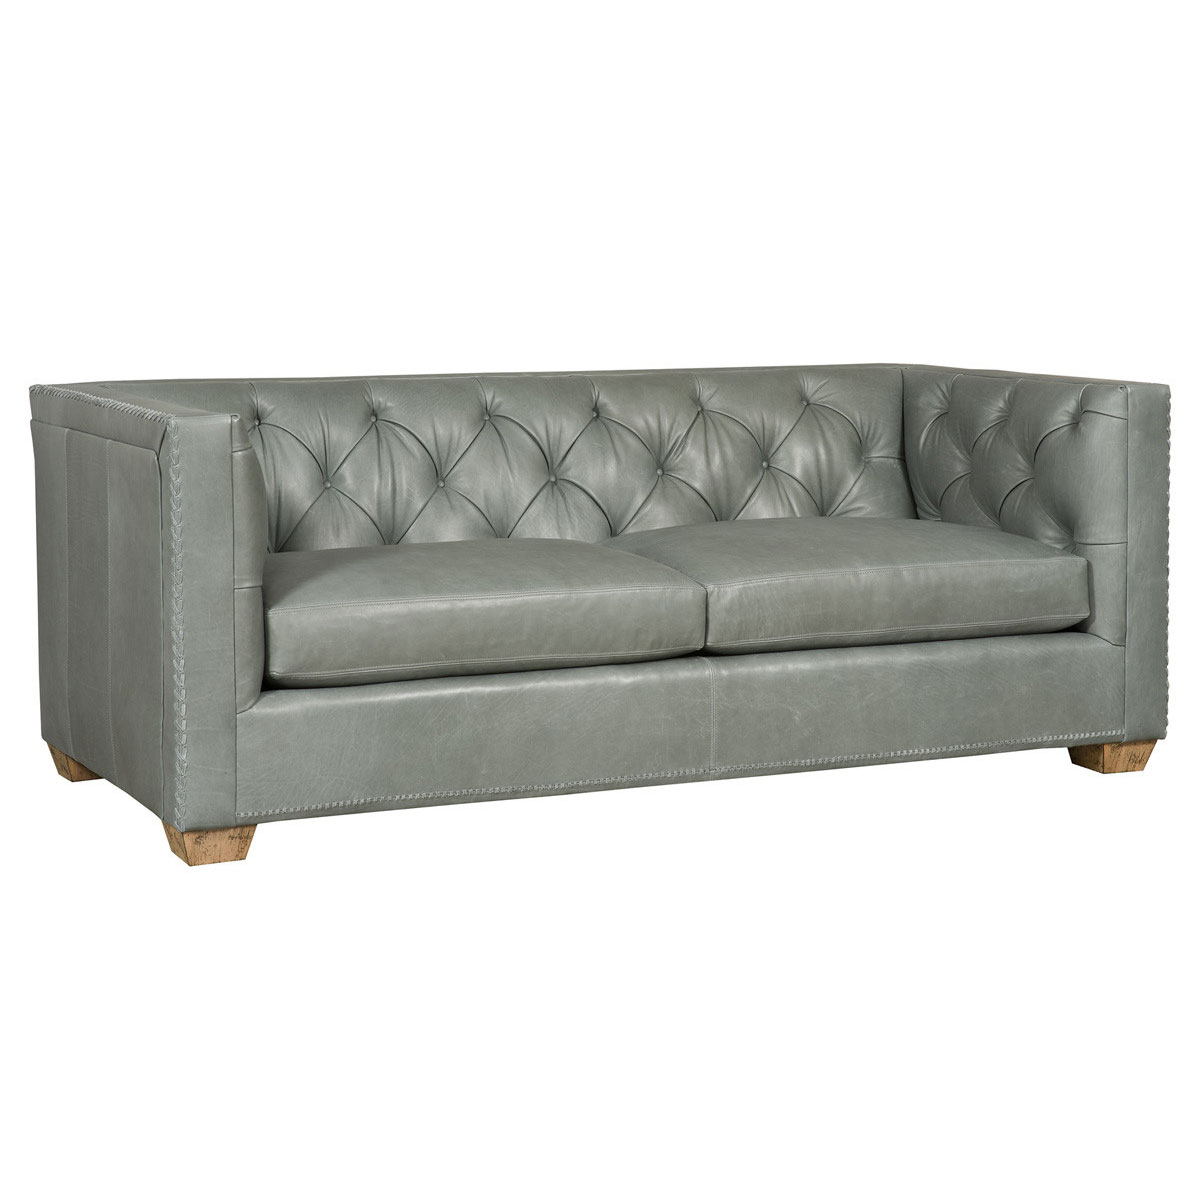 6284 Belle Meade Sofa by McKinley Leather